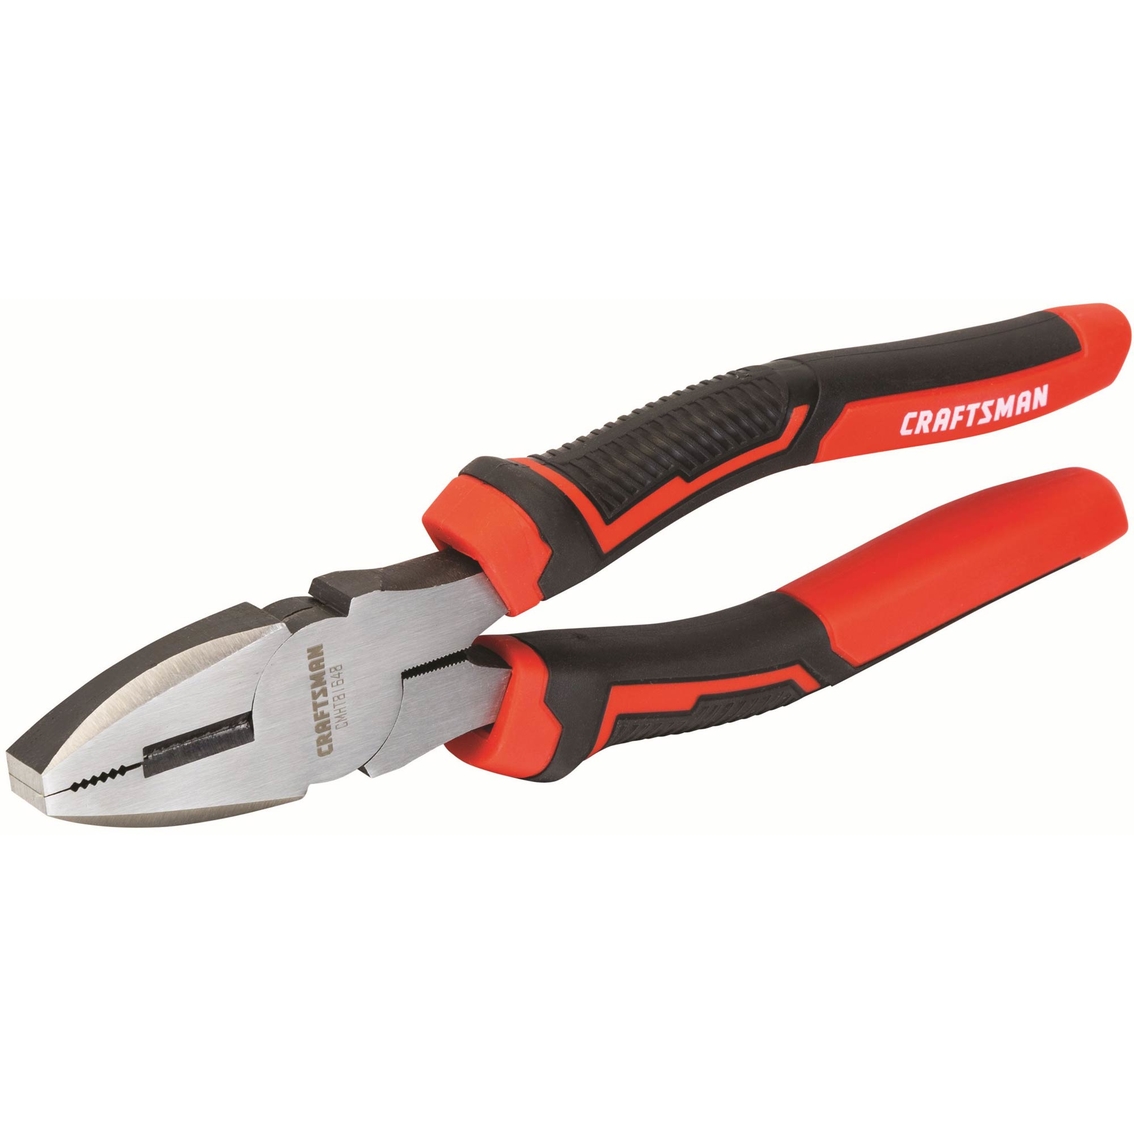 CRAFTSMAN 8-in Cutting Pliers - Image 2 of 3